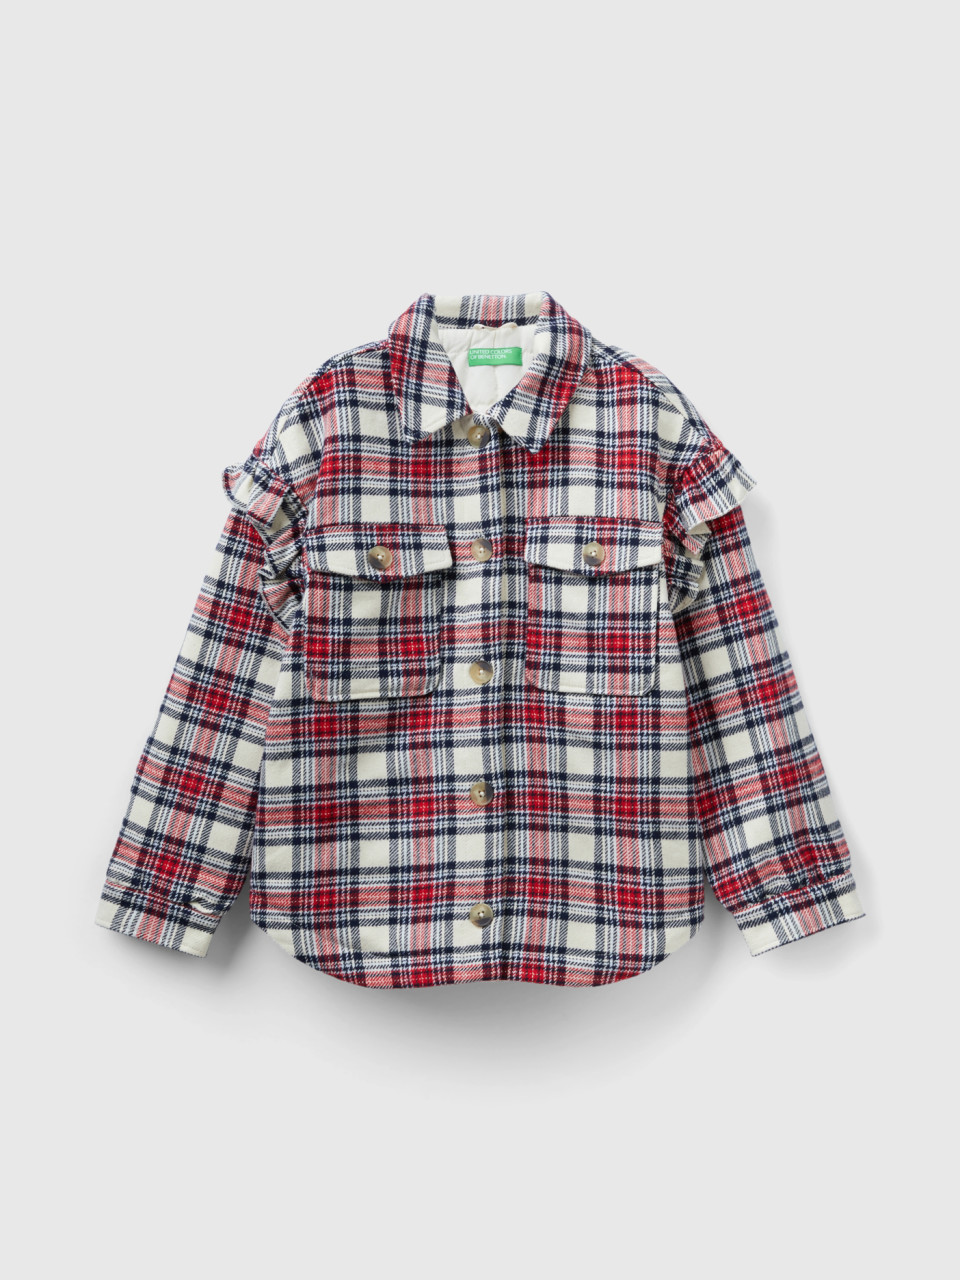 Benetton, Padded Check Jacket With Ruffles, Multi-color, Kids